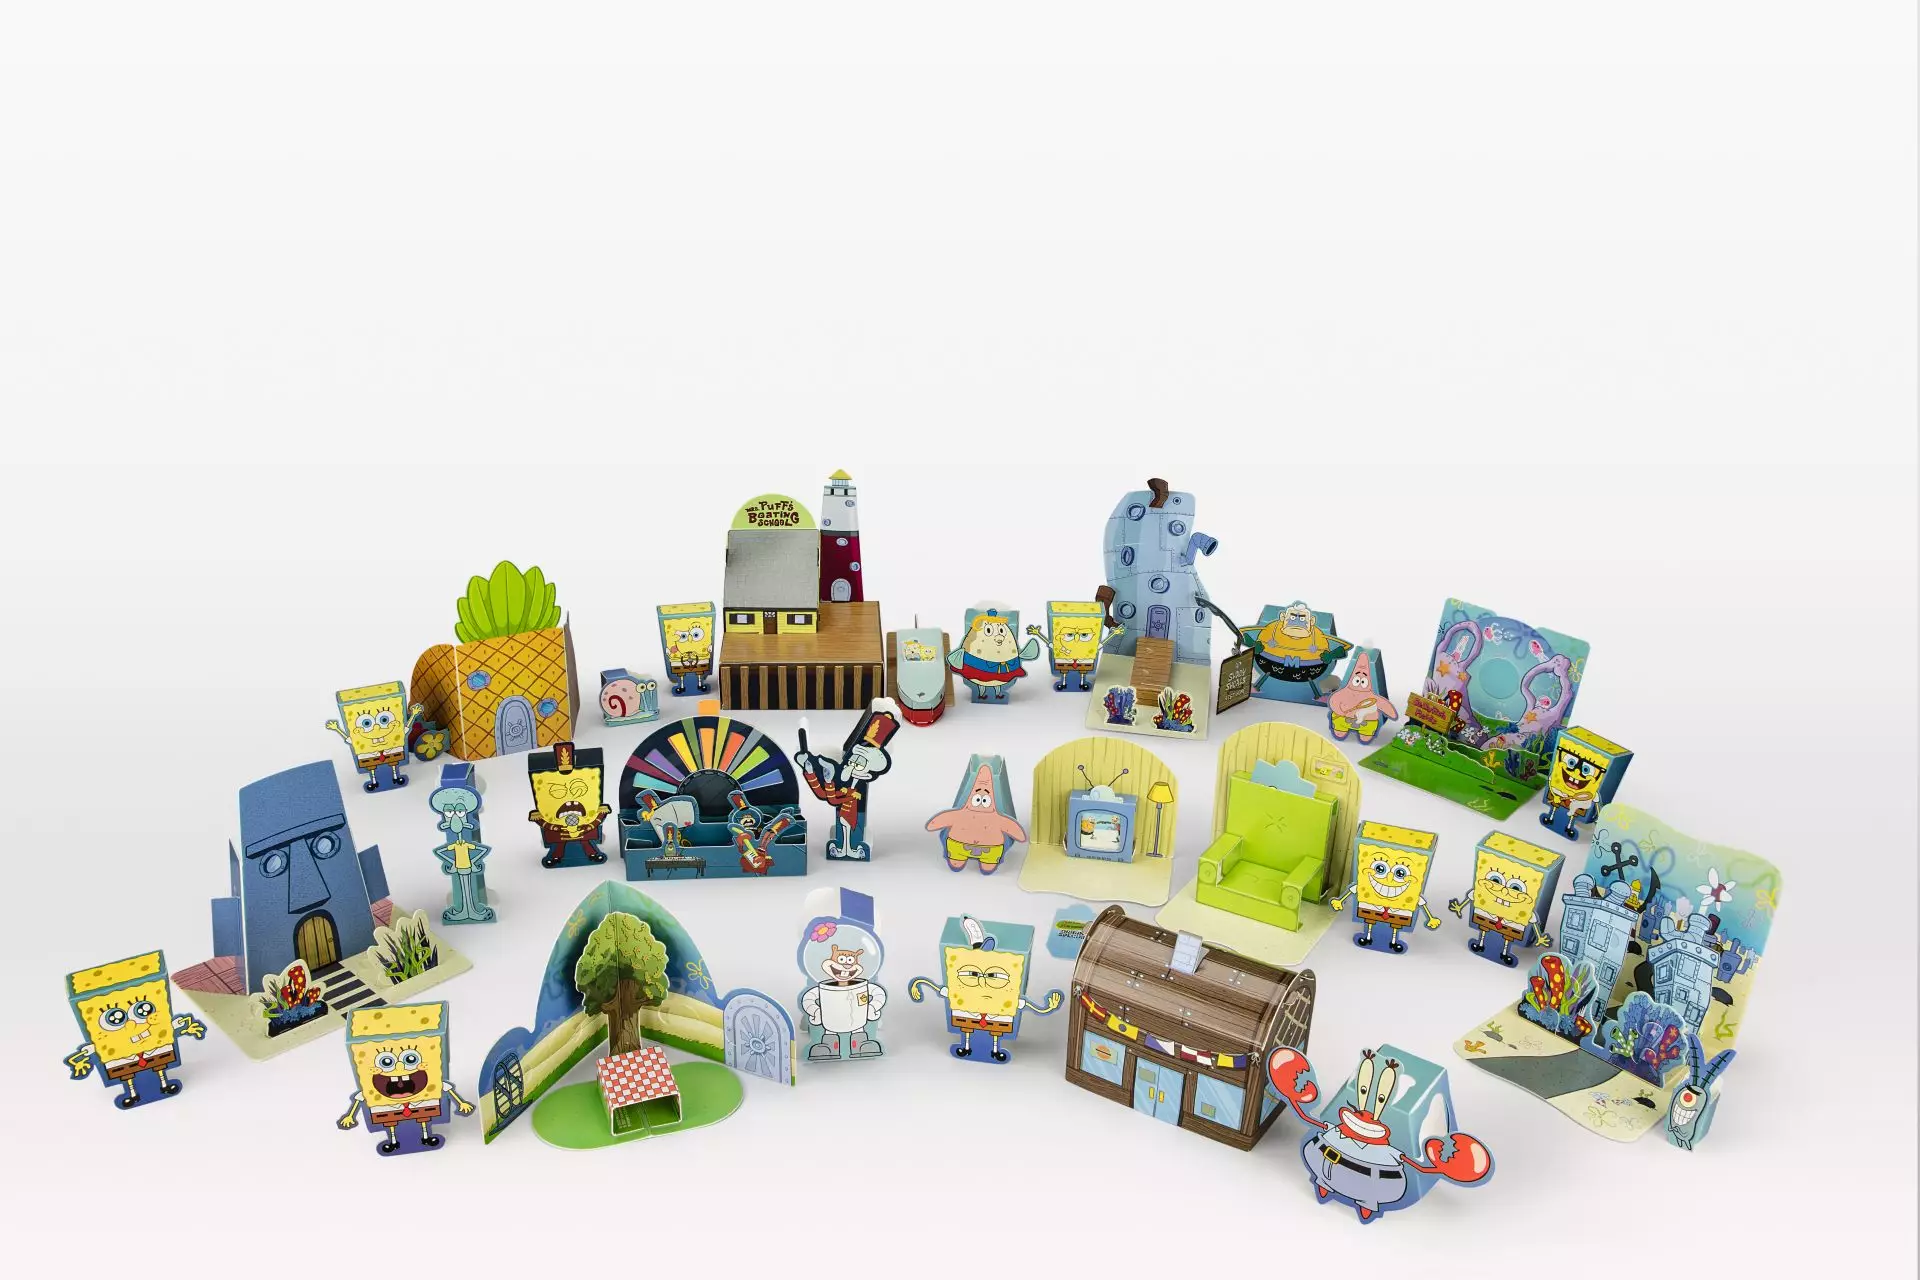 The SpongeBob Happy Meal will be dropping tomorrow, Wednesday 14th April and will run until 19th May (